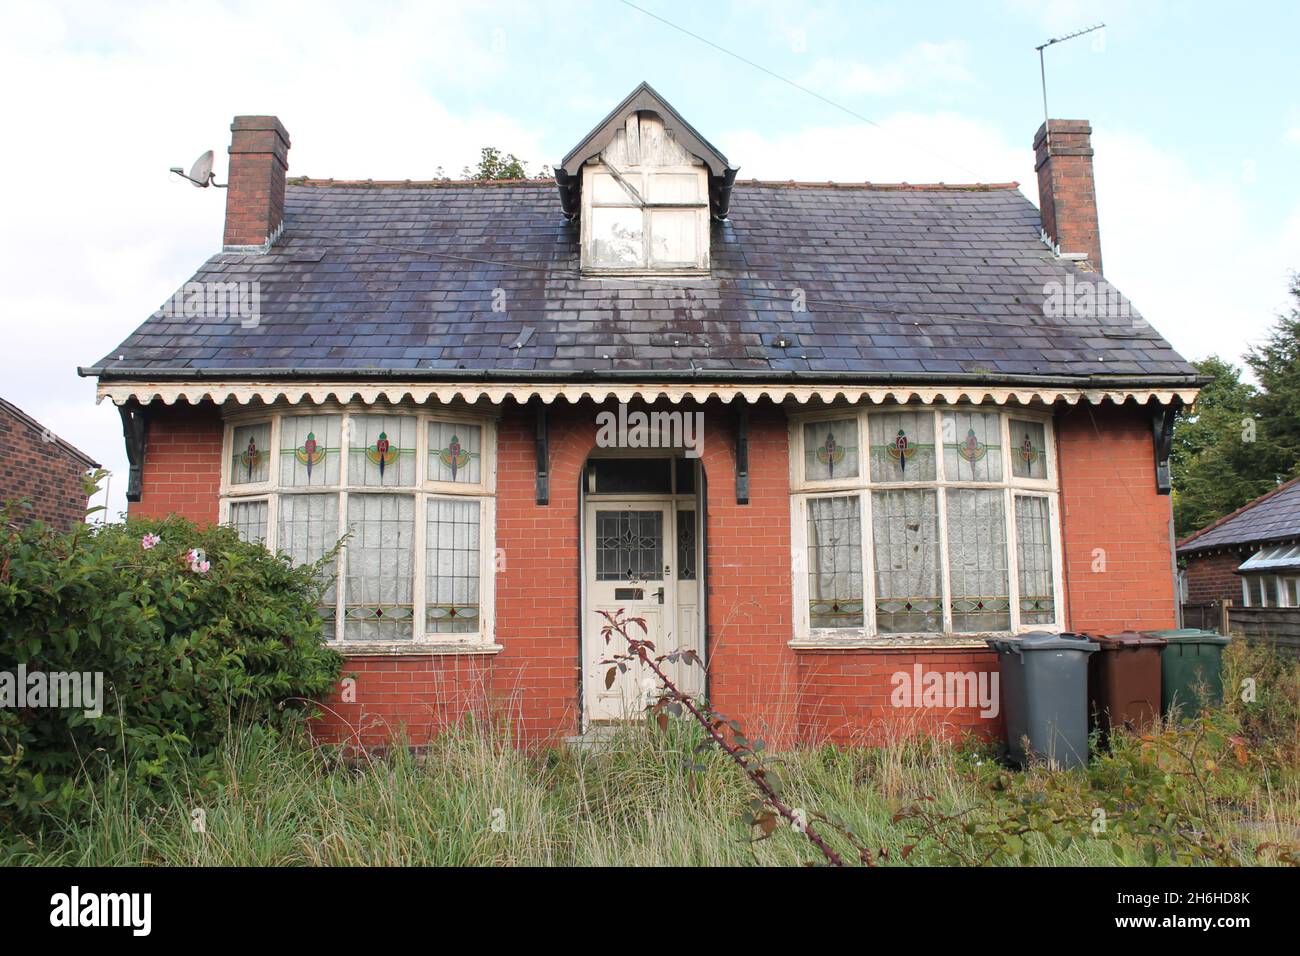 Run down bungalow in need of renovation. Single storey home fixer upper concept Stock Photo